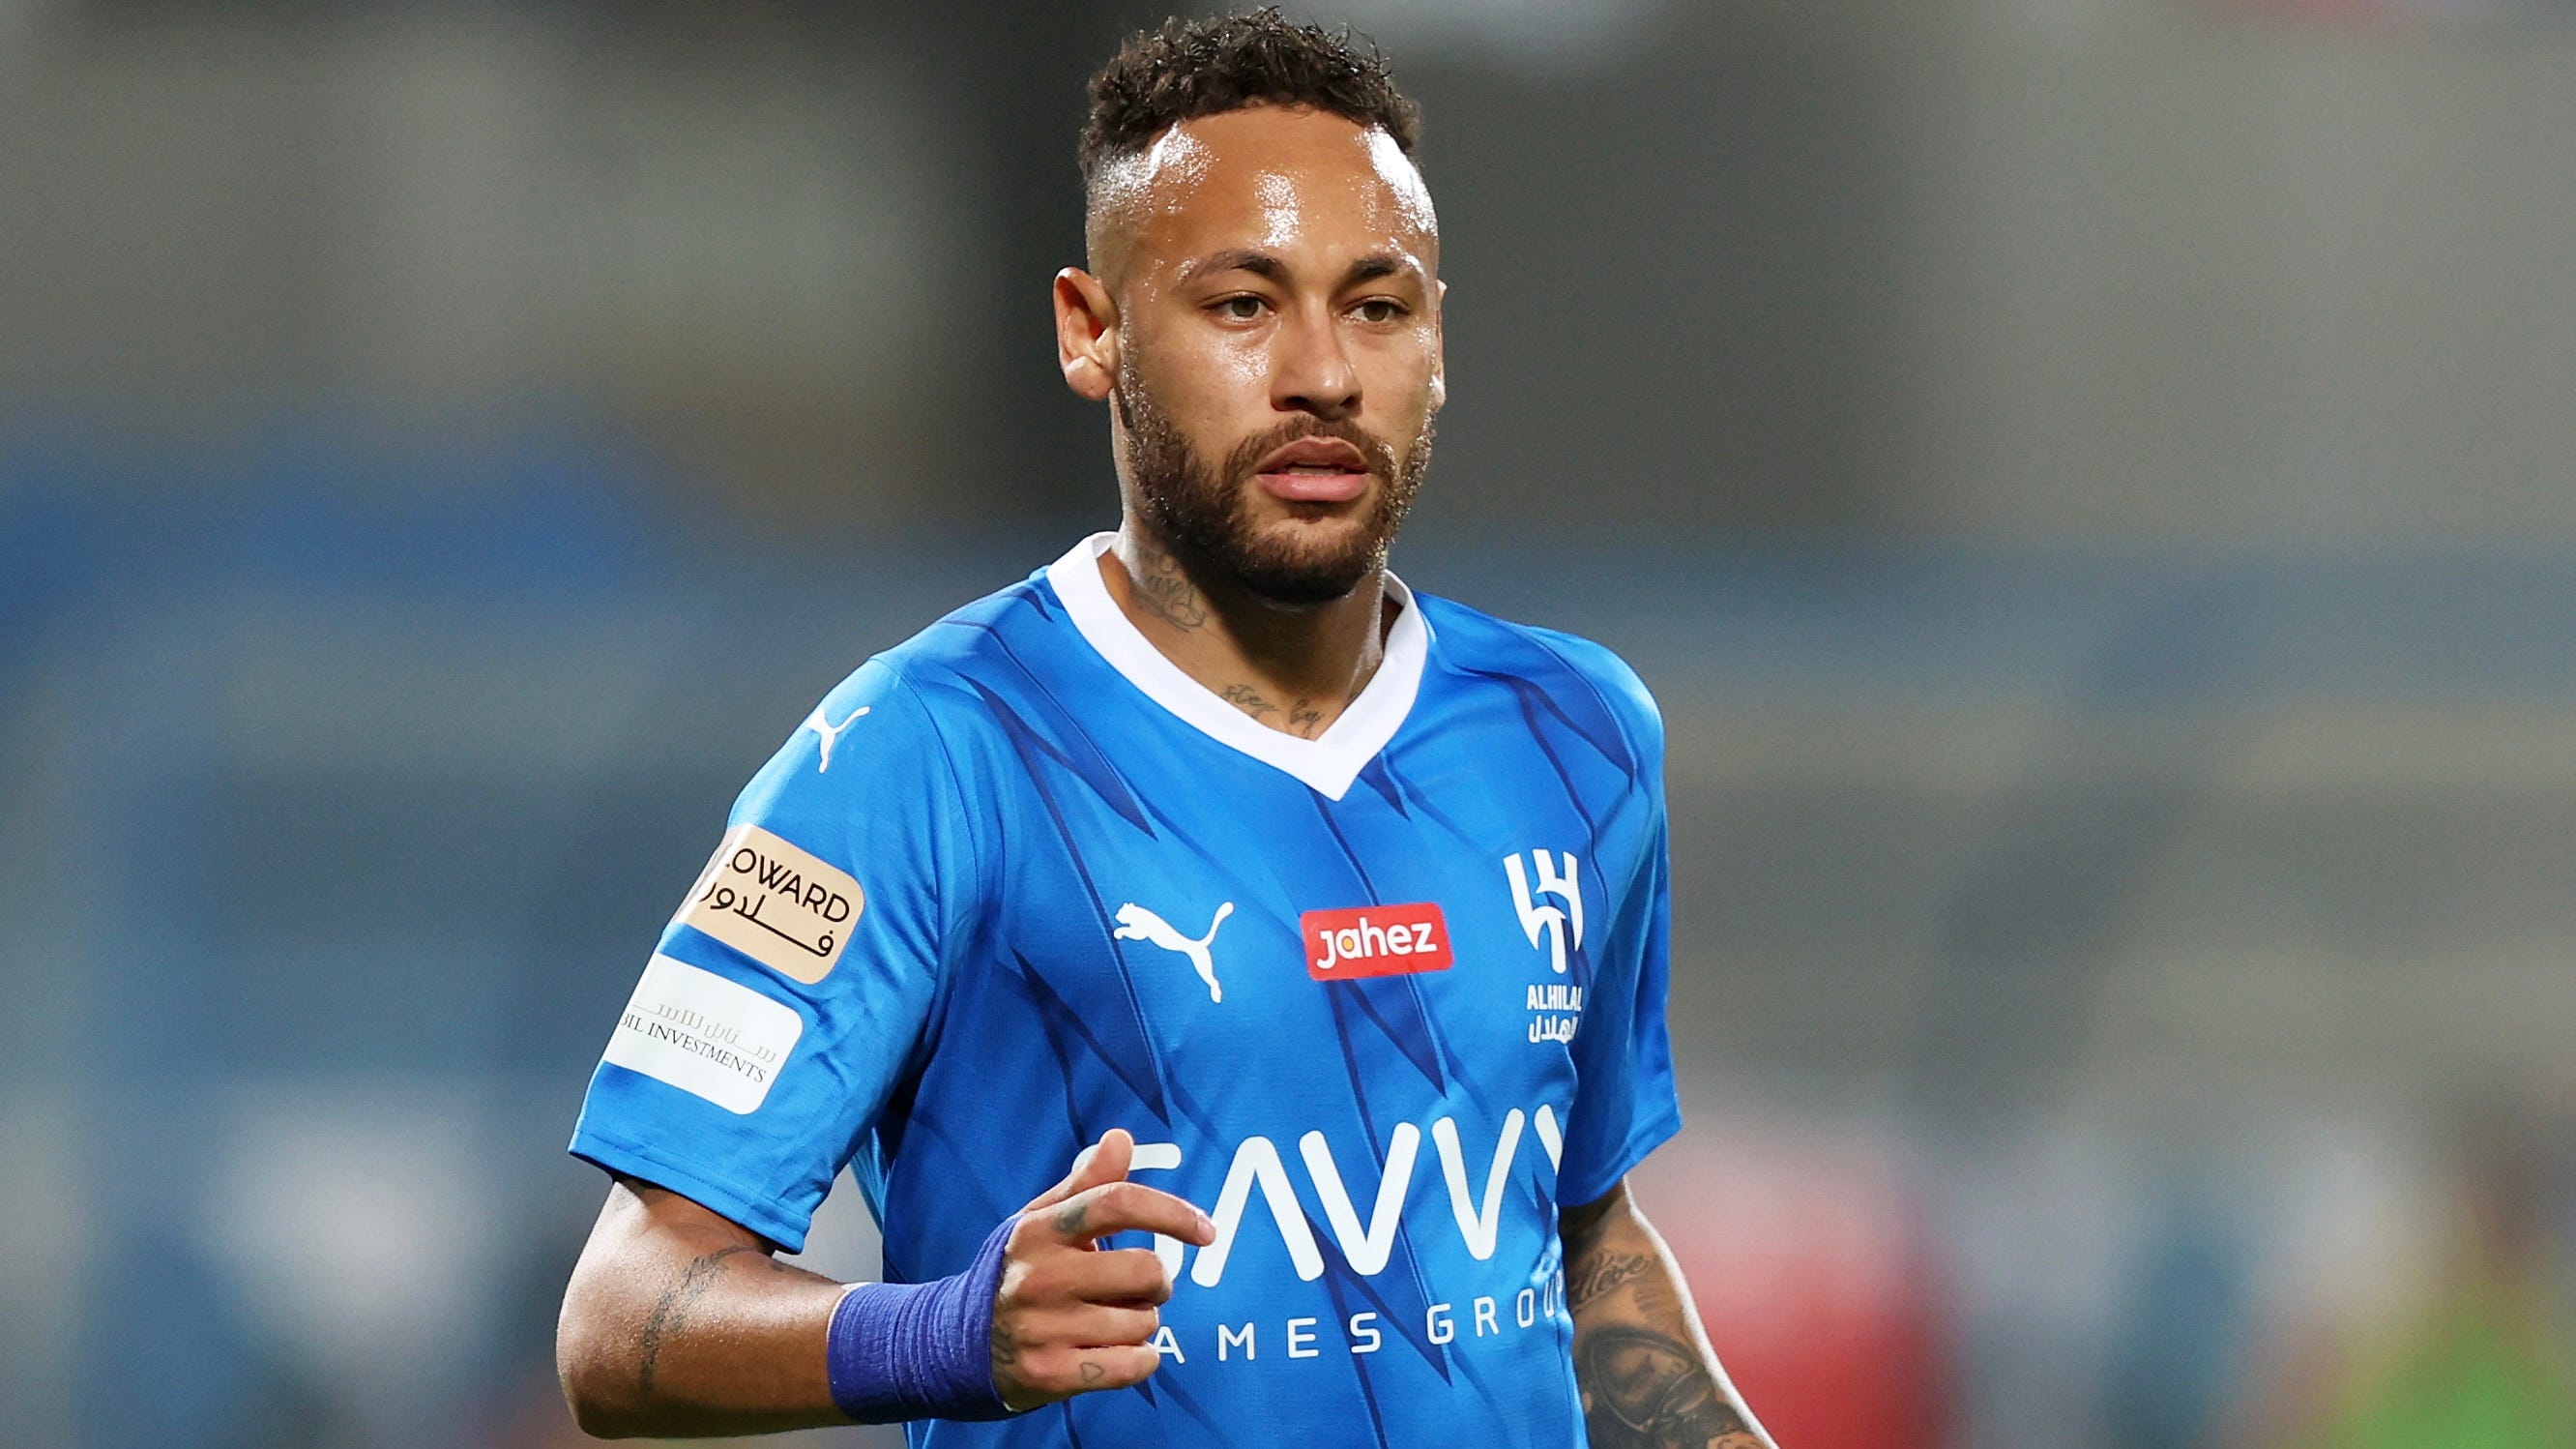 WATCH: Neymar has lift off at Al-Hilal! Ex-PSG star finishes clinically to score first goal for new club in AFC Champions League | Goal.com UK